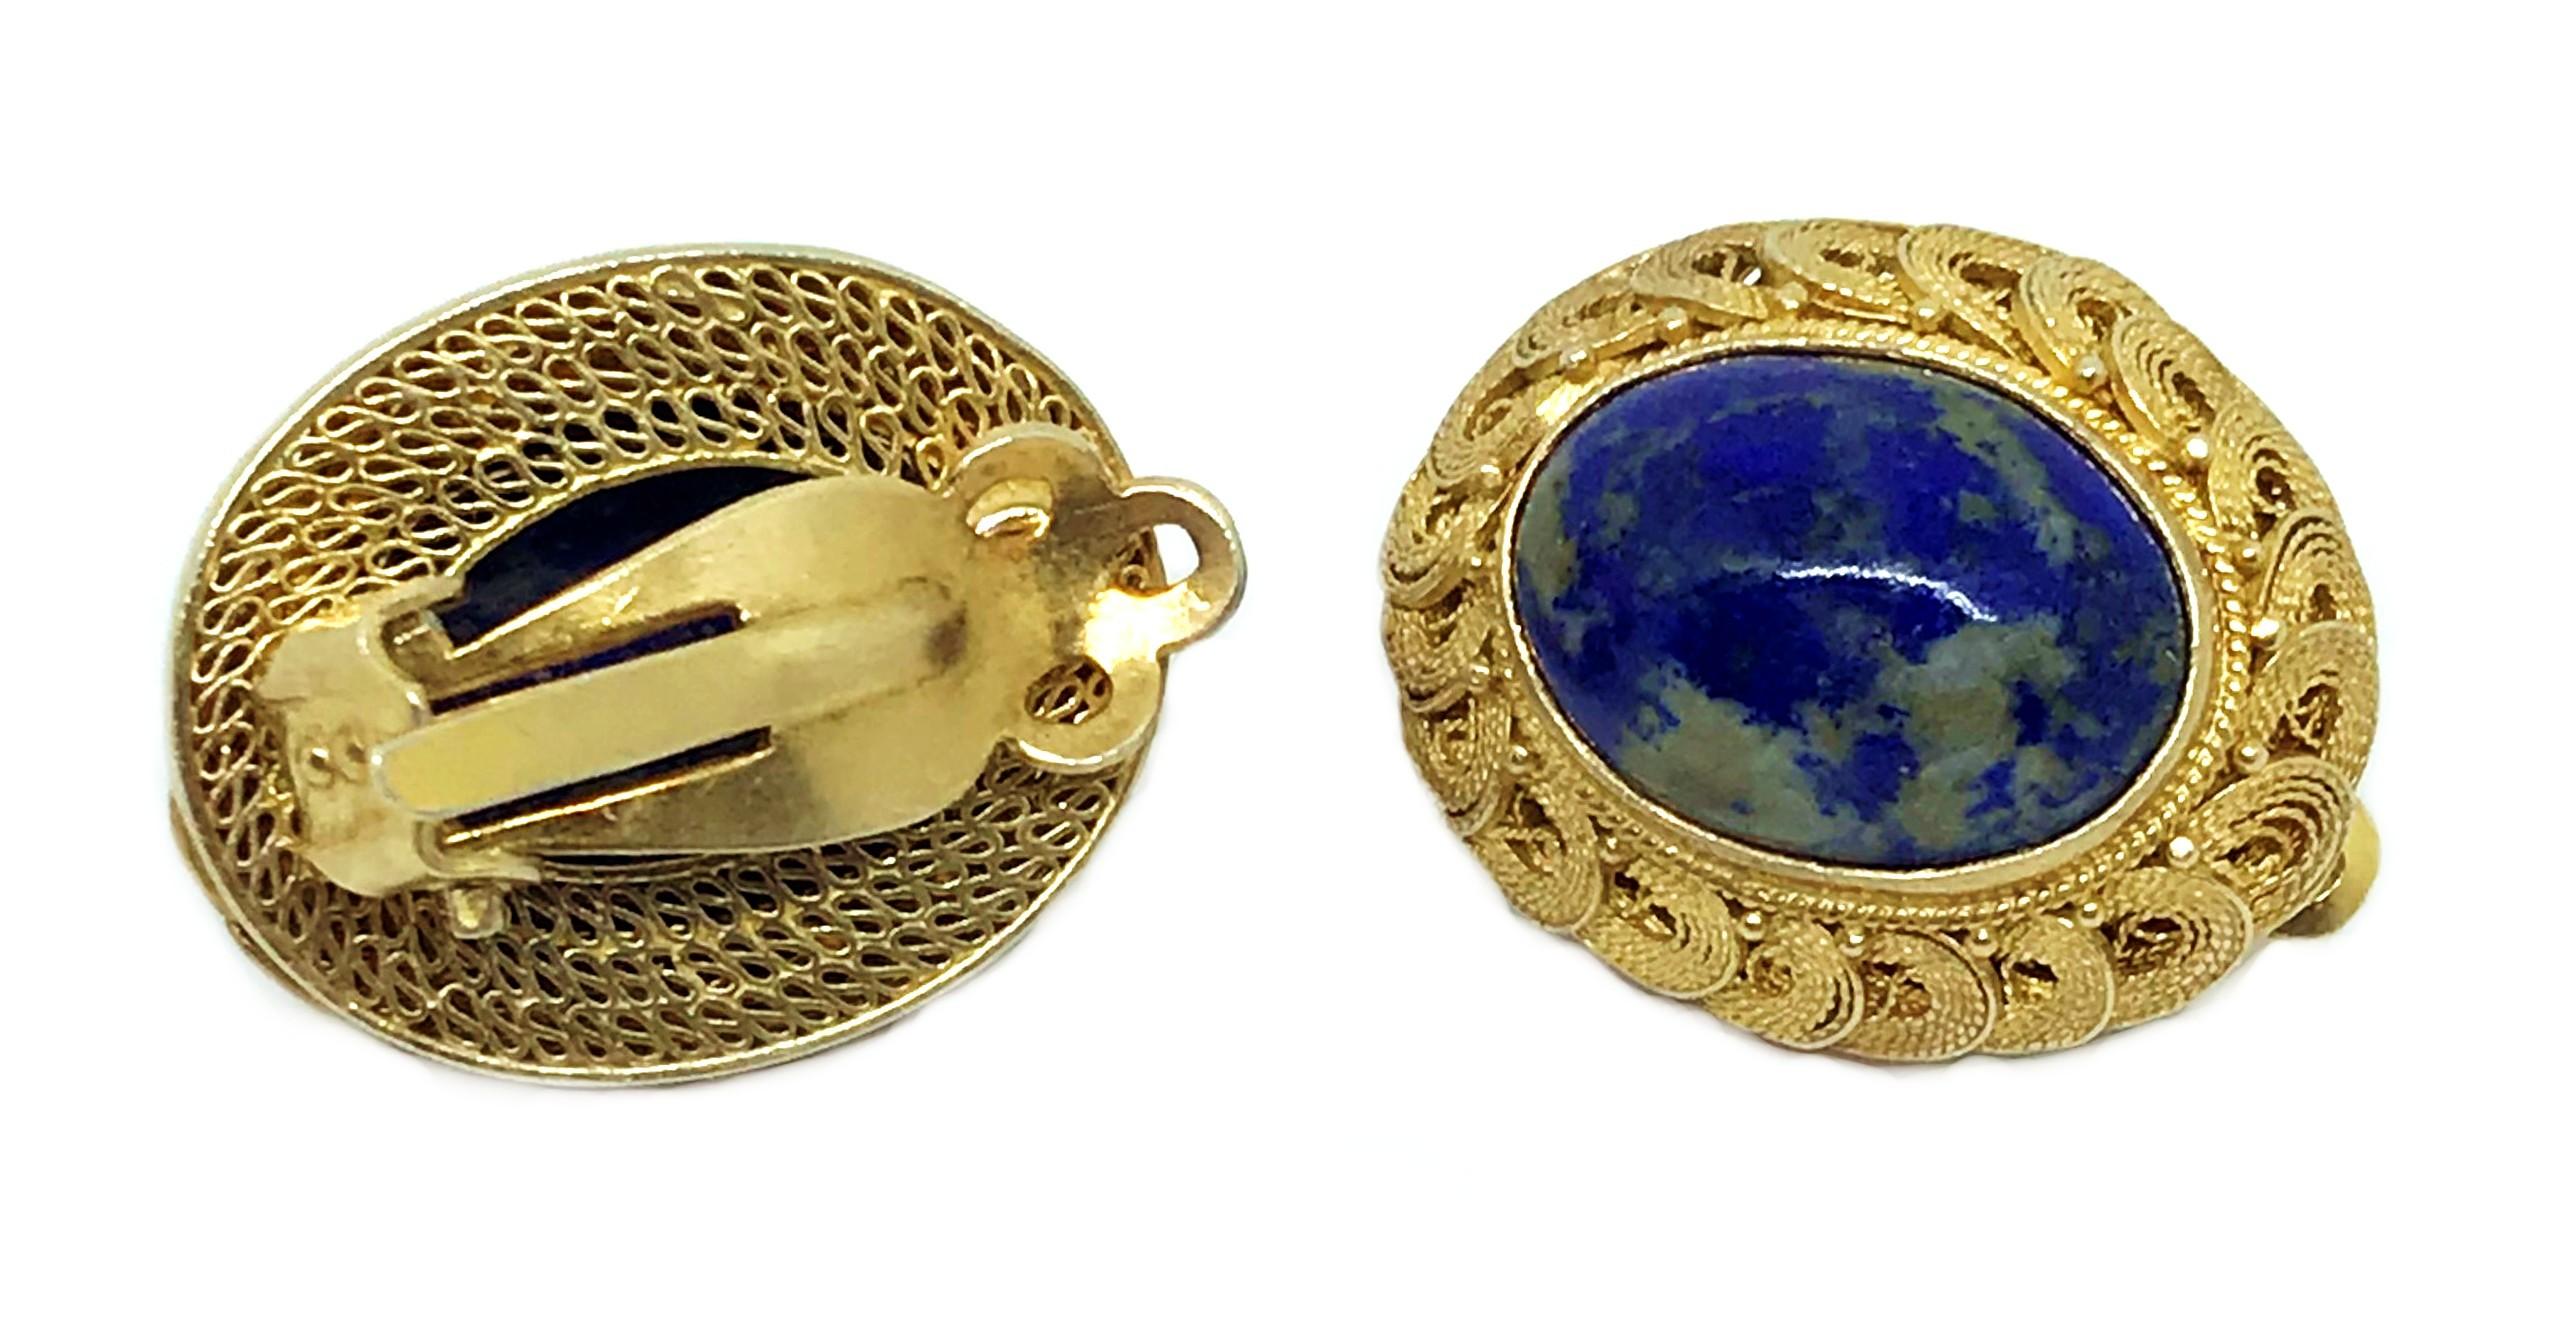 Circa 1950s to 1960s Chinese gold-plated sterling silver clip-back earrings set with oval sodalite cabochons.  They are done in an ornate filigree design and each earring measures 1